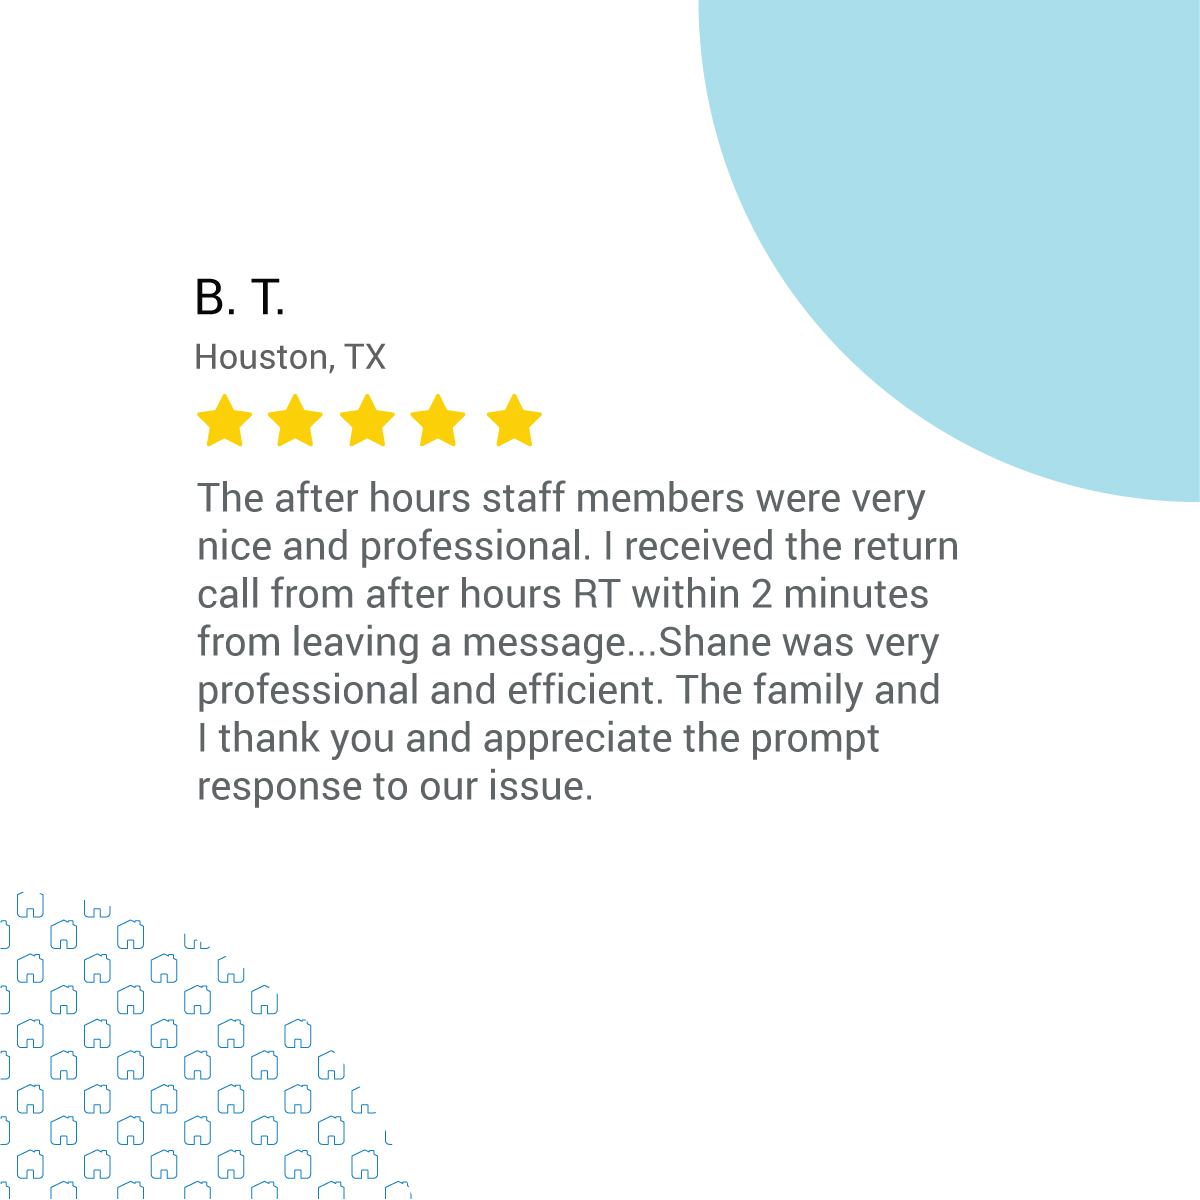 We love hearing positive feedback from our customers! We're glad we could assist you efficiently and effectively. Thank you for your kind words—they mean the world to us!
#RespiratoryTherapy #PediatricHomeService #PromptService